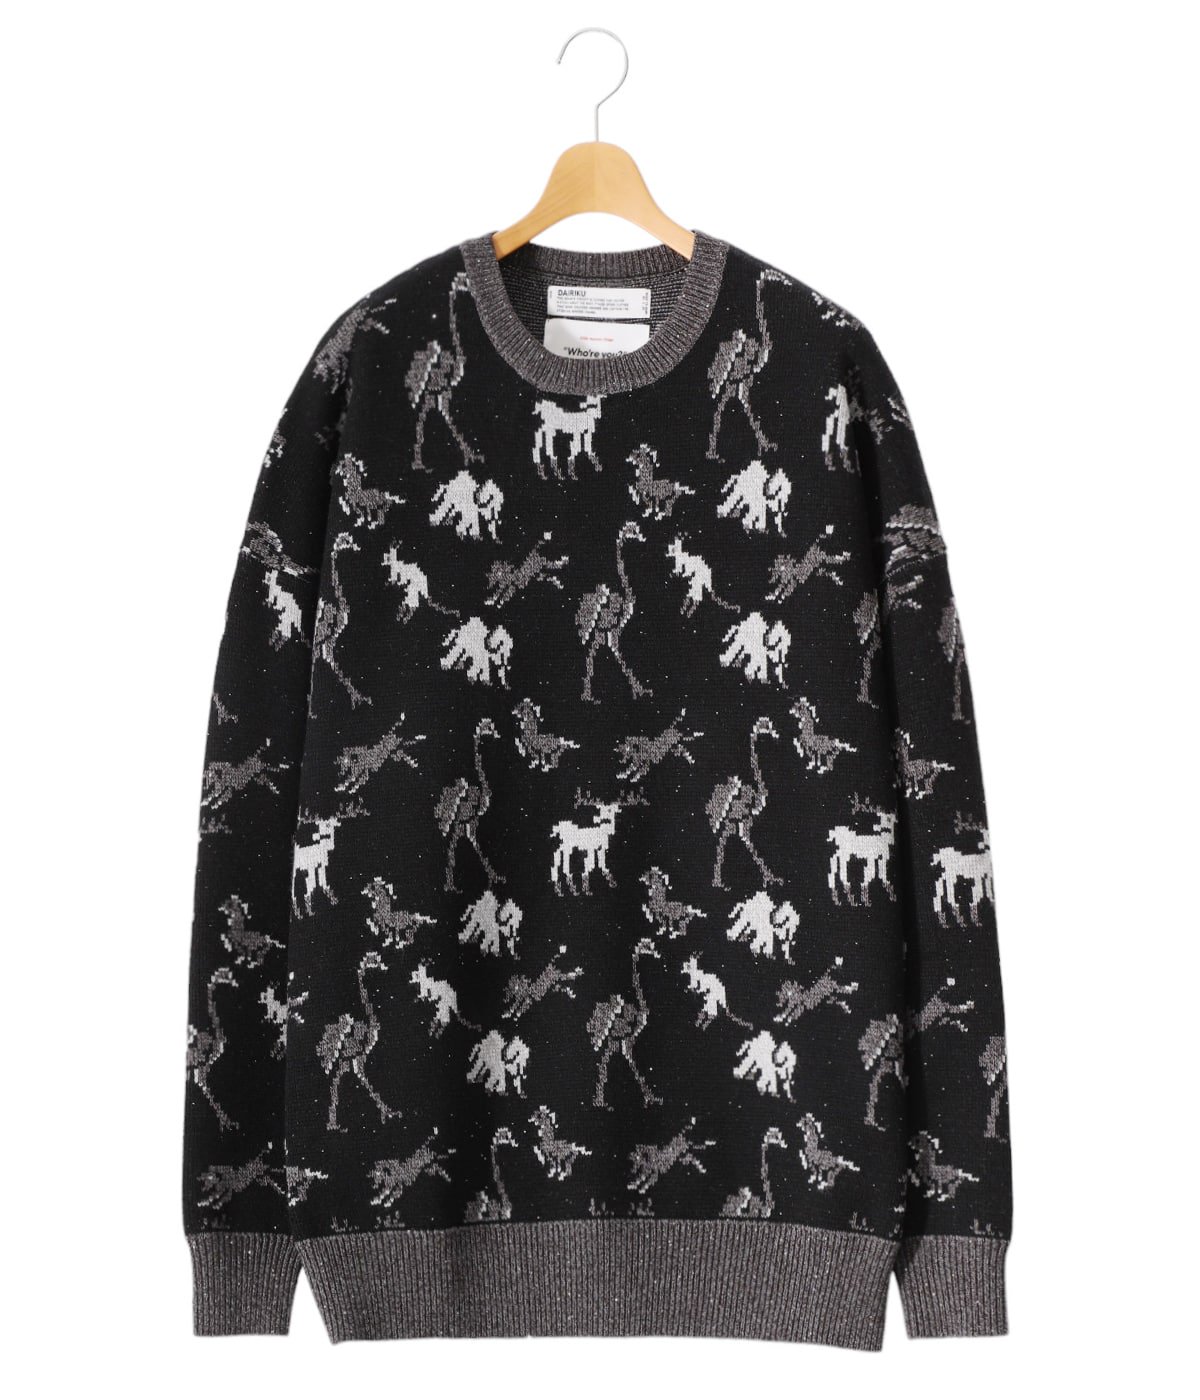 “ZOO“ Oversized Pullover Knit